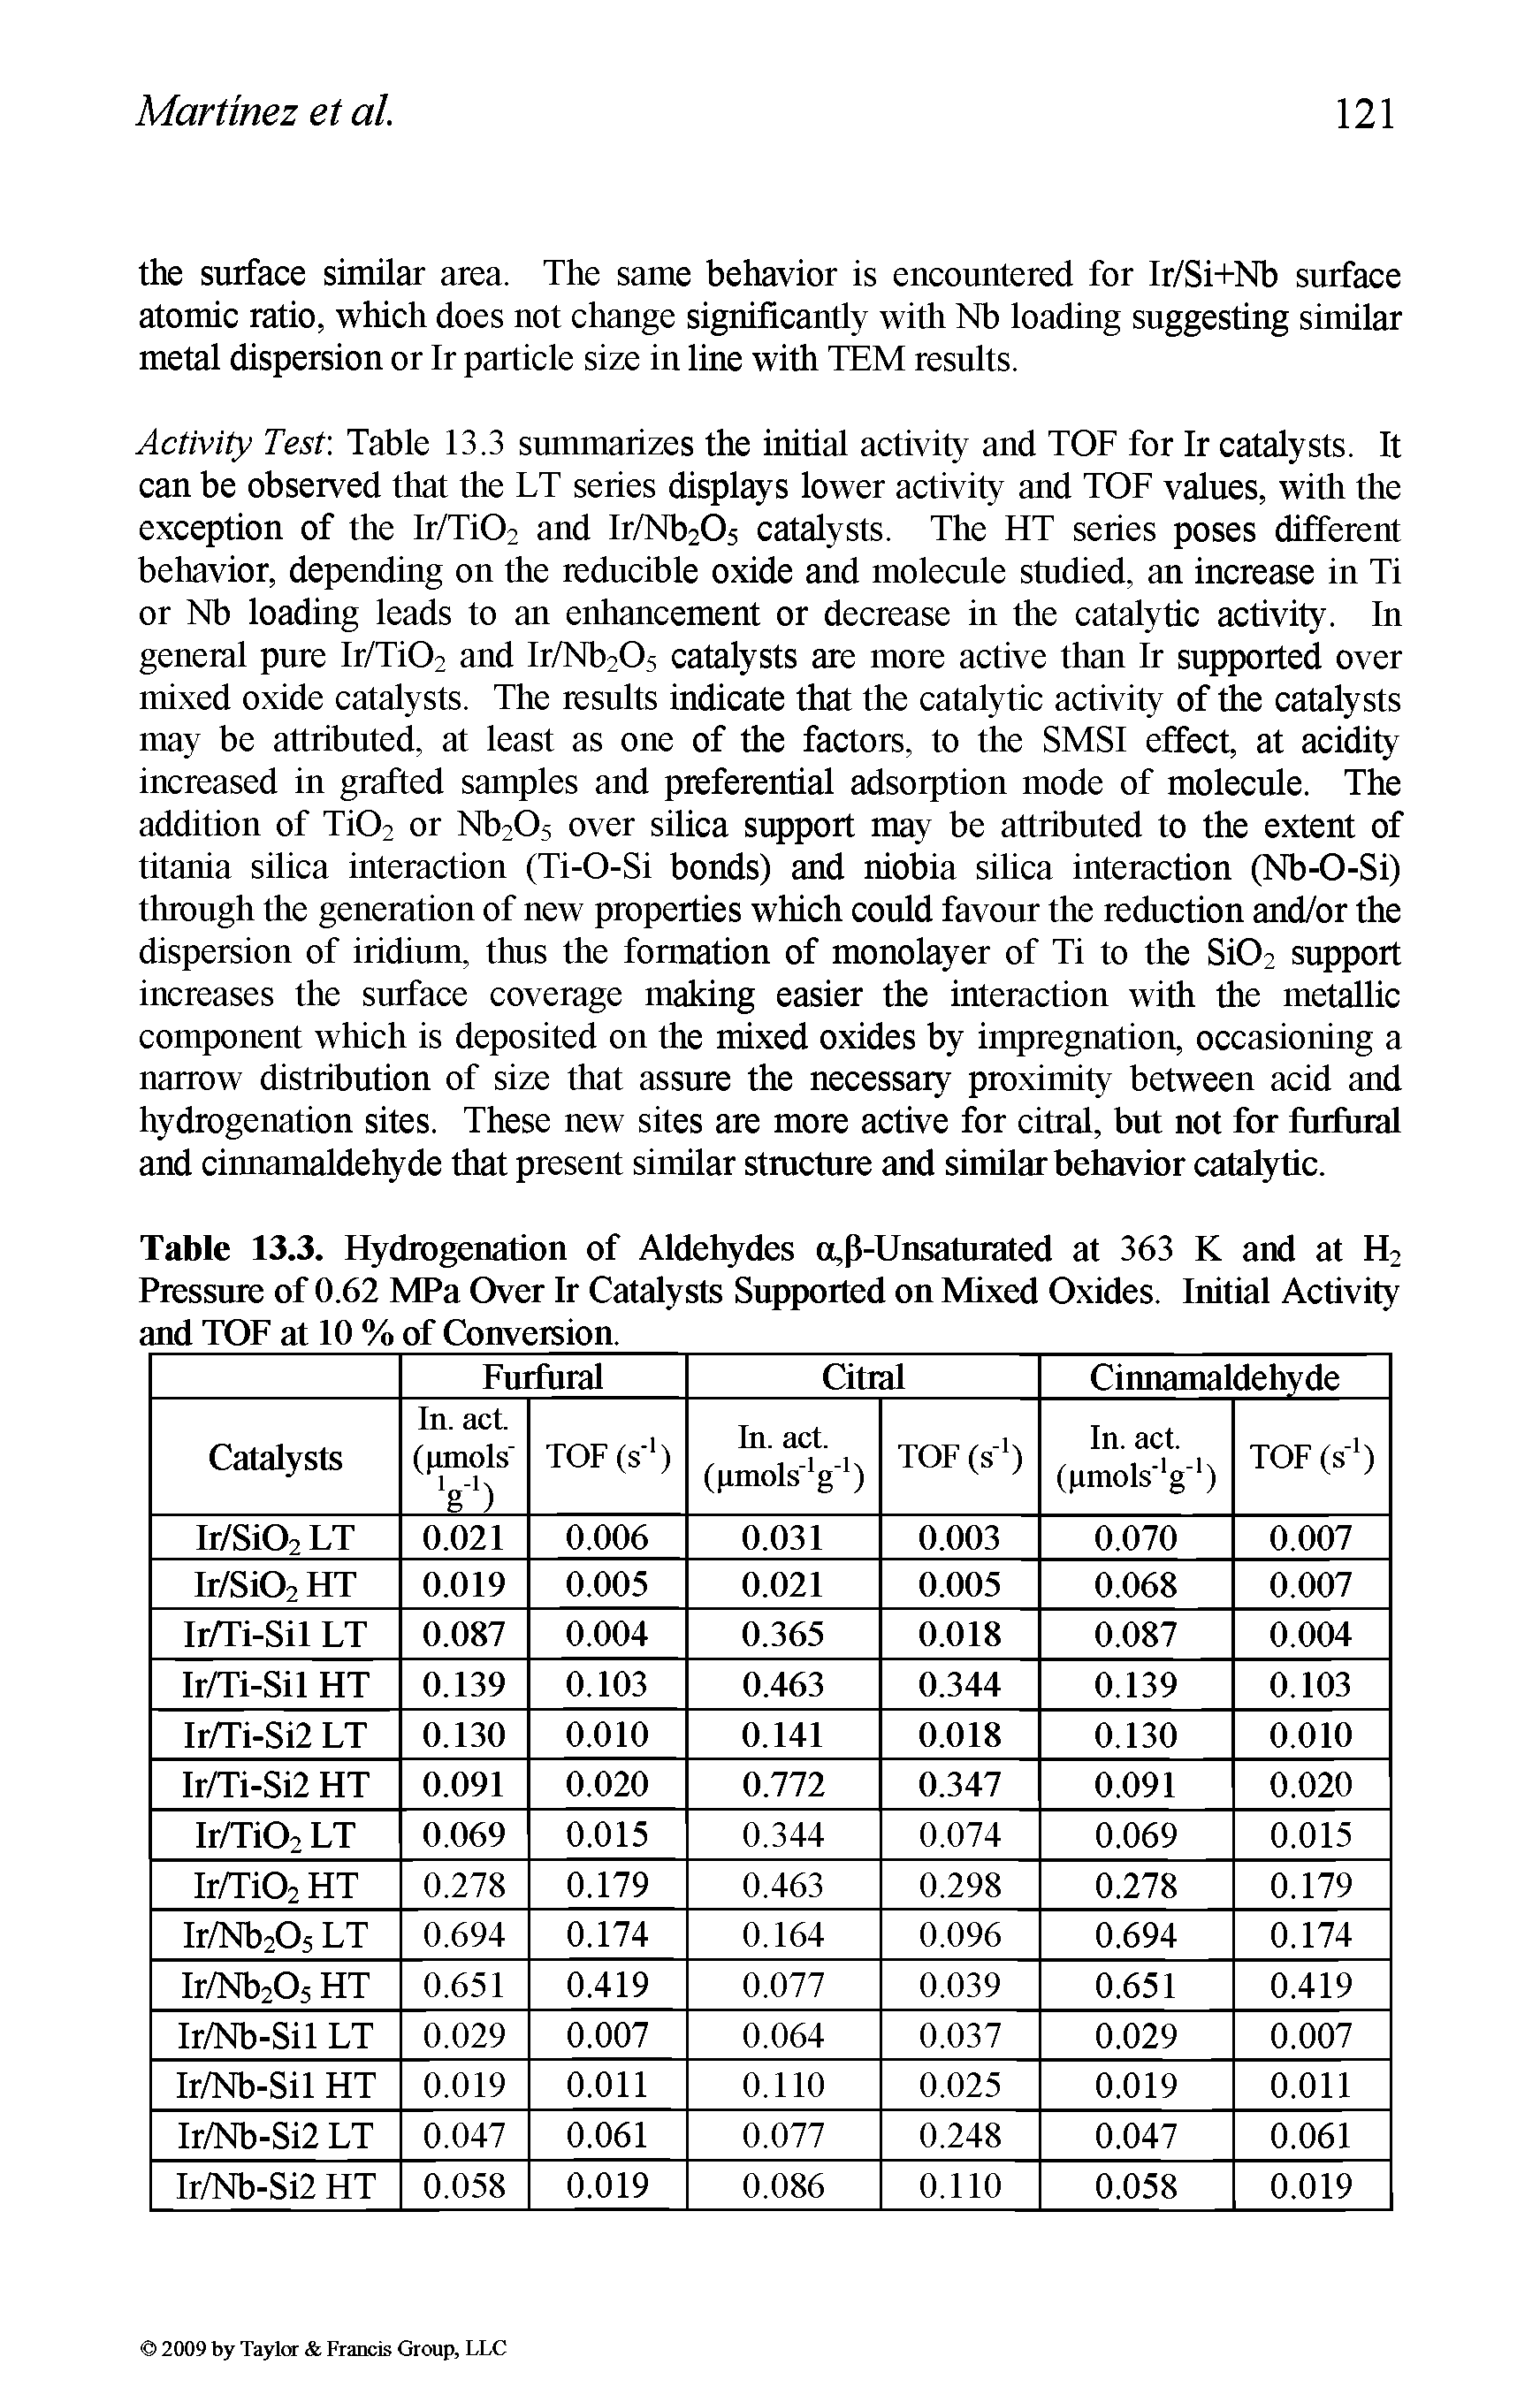 Table 13.3. Hydrogenation of Aldehydes a,p-Unsaturated at 363 K and at H2 Pressure of 0.62 MPa Over Ir Catalysts Supported on Mixed Oxides. Initial Activity and TOP at 10 % of Conversion.